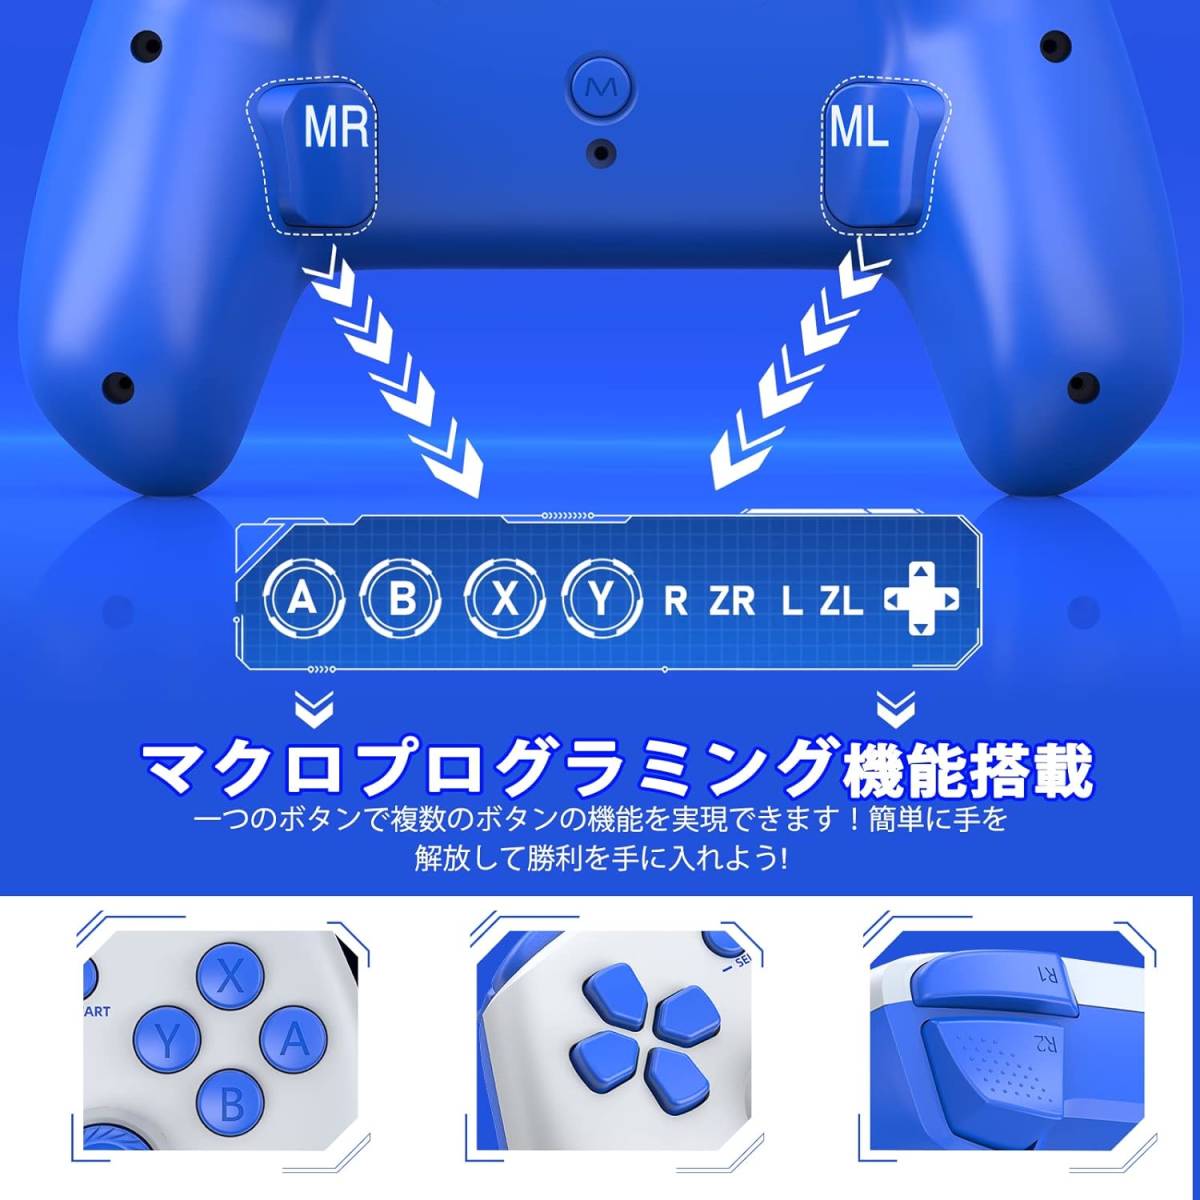 Switch コントローラー マクロ機能 スリープ復帰 Switch/Lite/OLED/Android/IOS/PCに対応